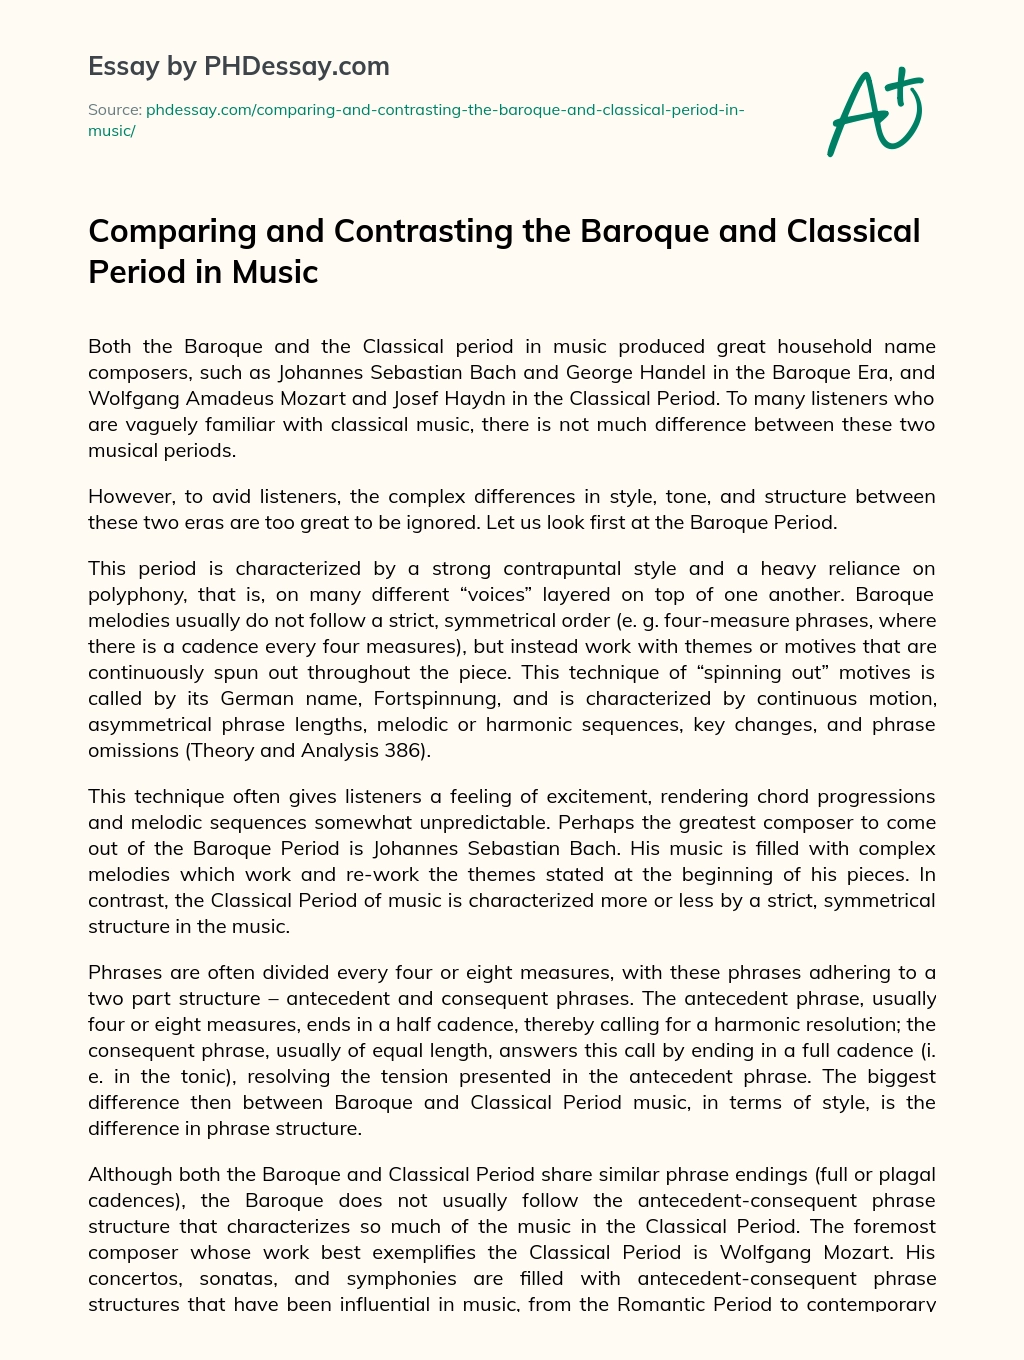 Comparing and Contrasting the Baroque and Classical Period in Music essay